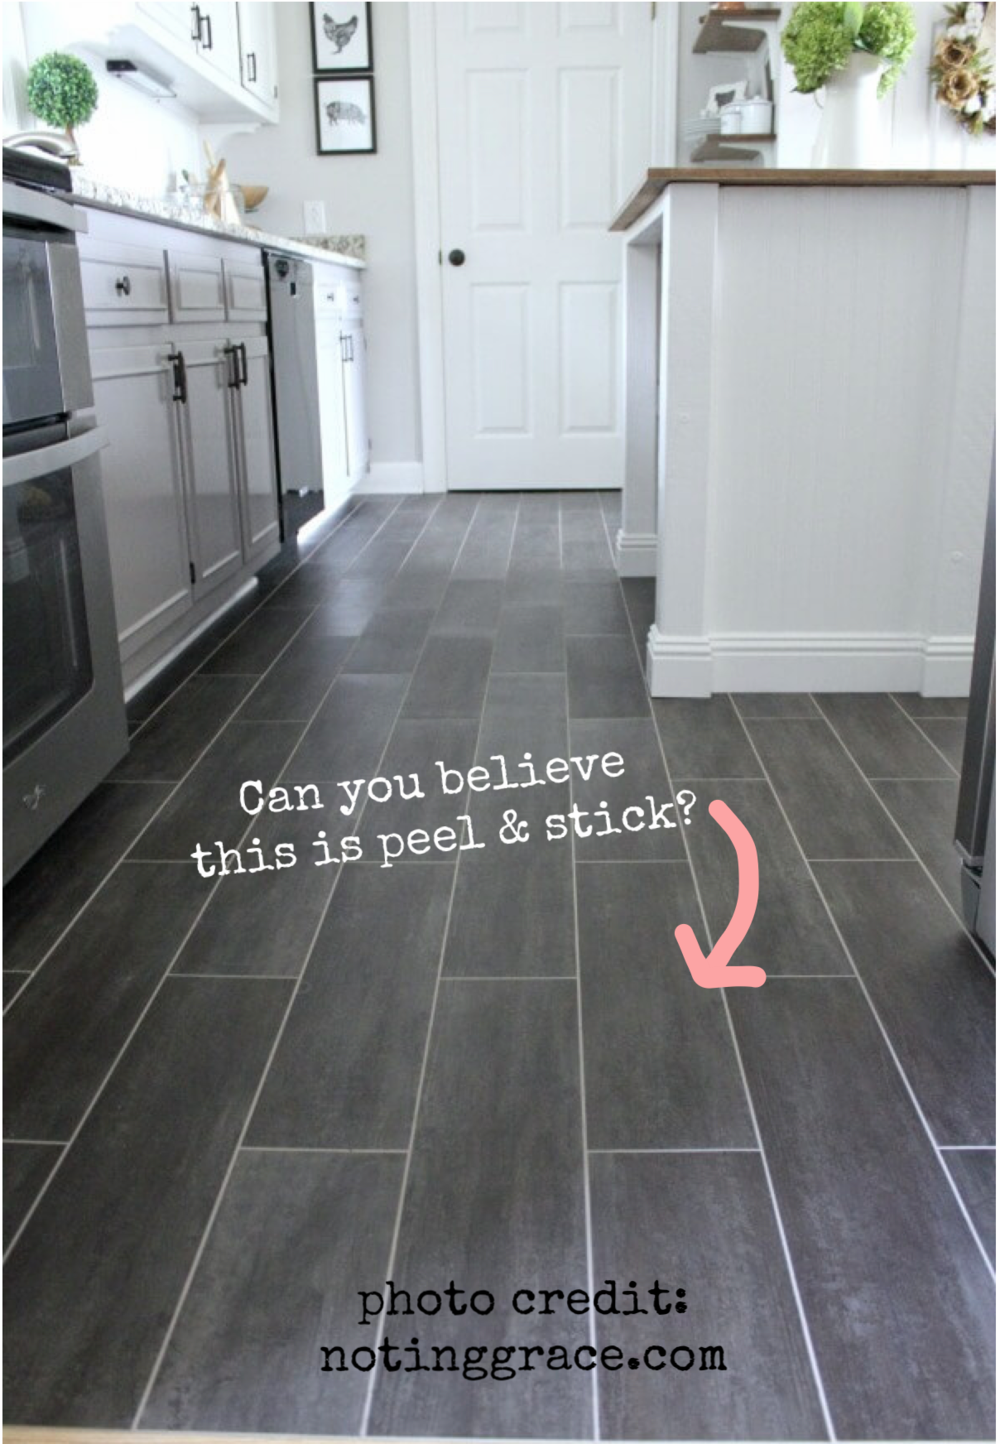 Ideas For Covering Up Tile Floors, Can You Lay Vinyl Flooring Over Tiles